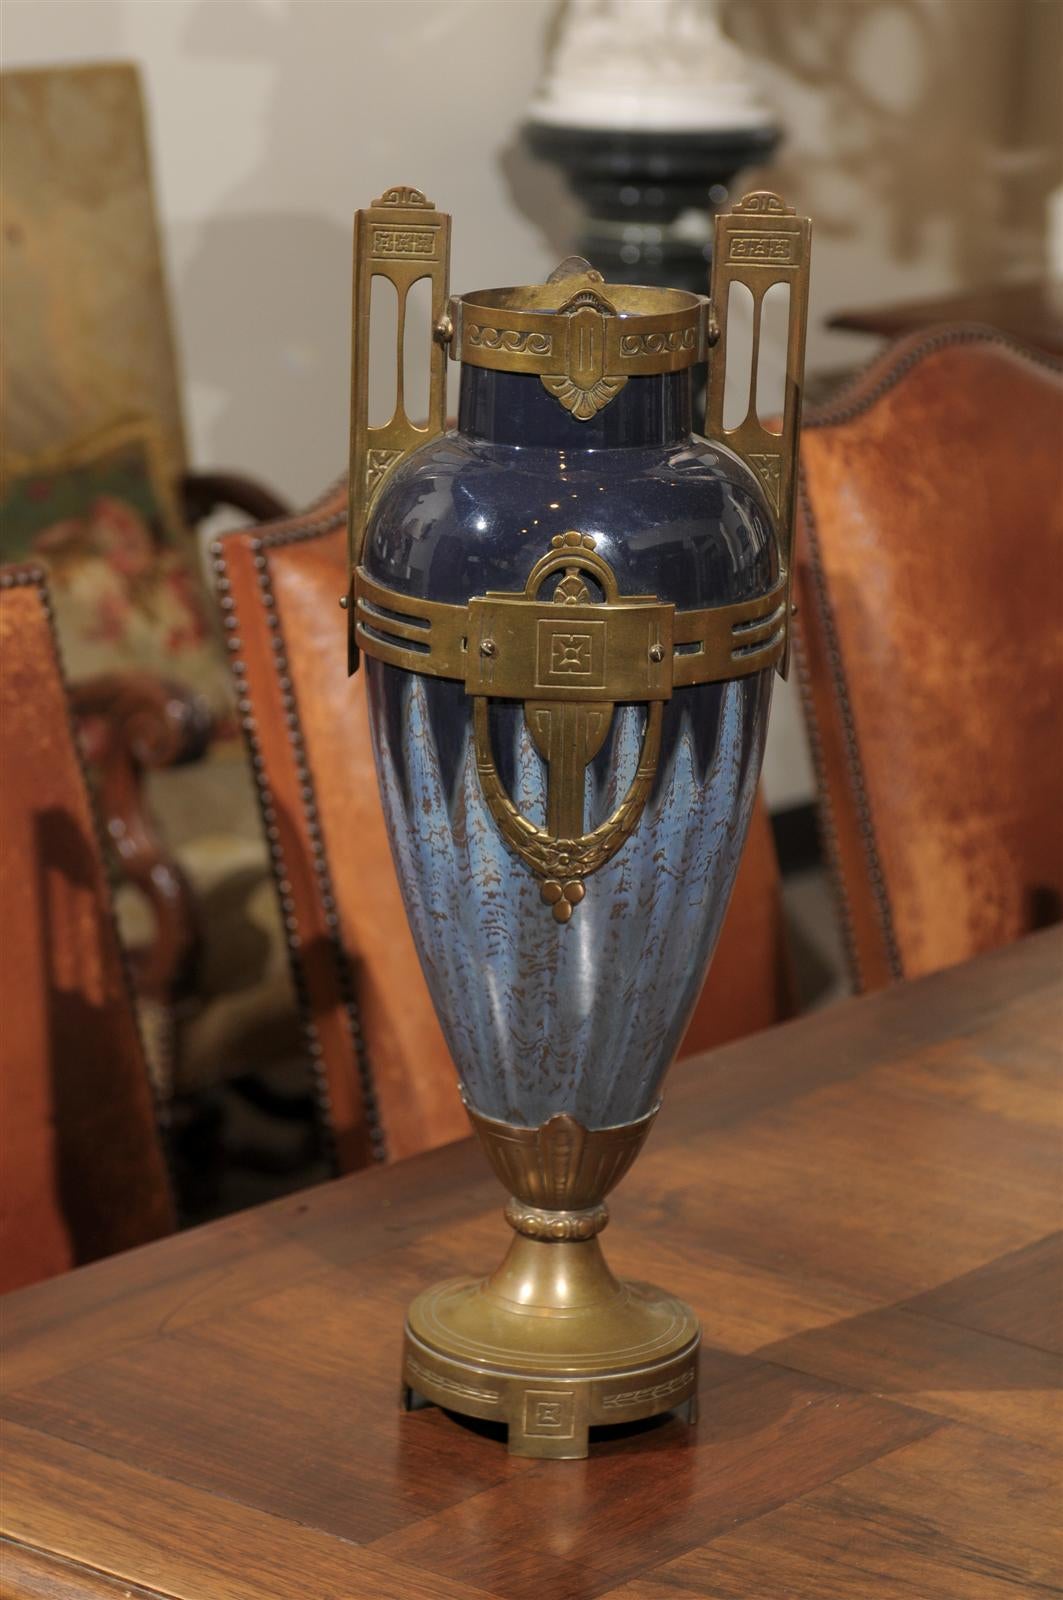 Napoleon lll  Blue Porcelain Vase with Bronze Fittings, Circa 1880
When a spot calls for a tall, single piece it can be hard find.  This is a beautiful vase with lovely blue glazed finish and substantial bronze handles and base.